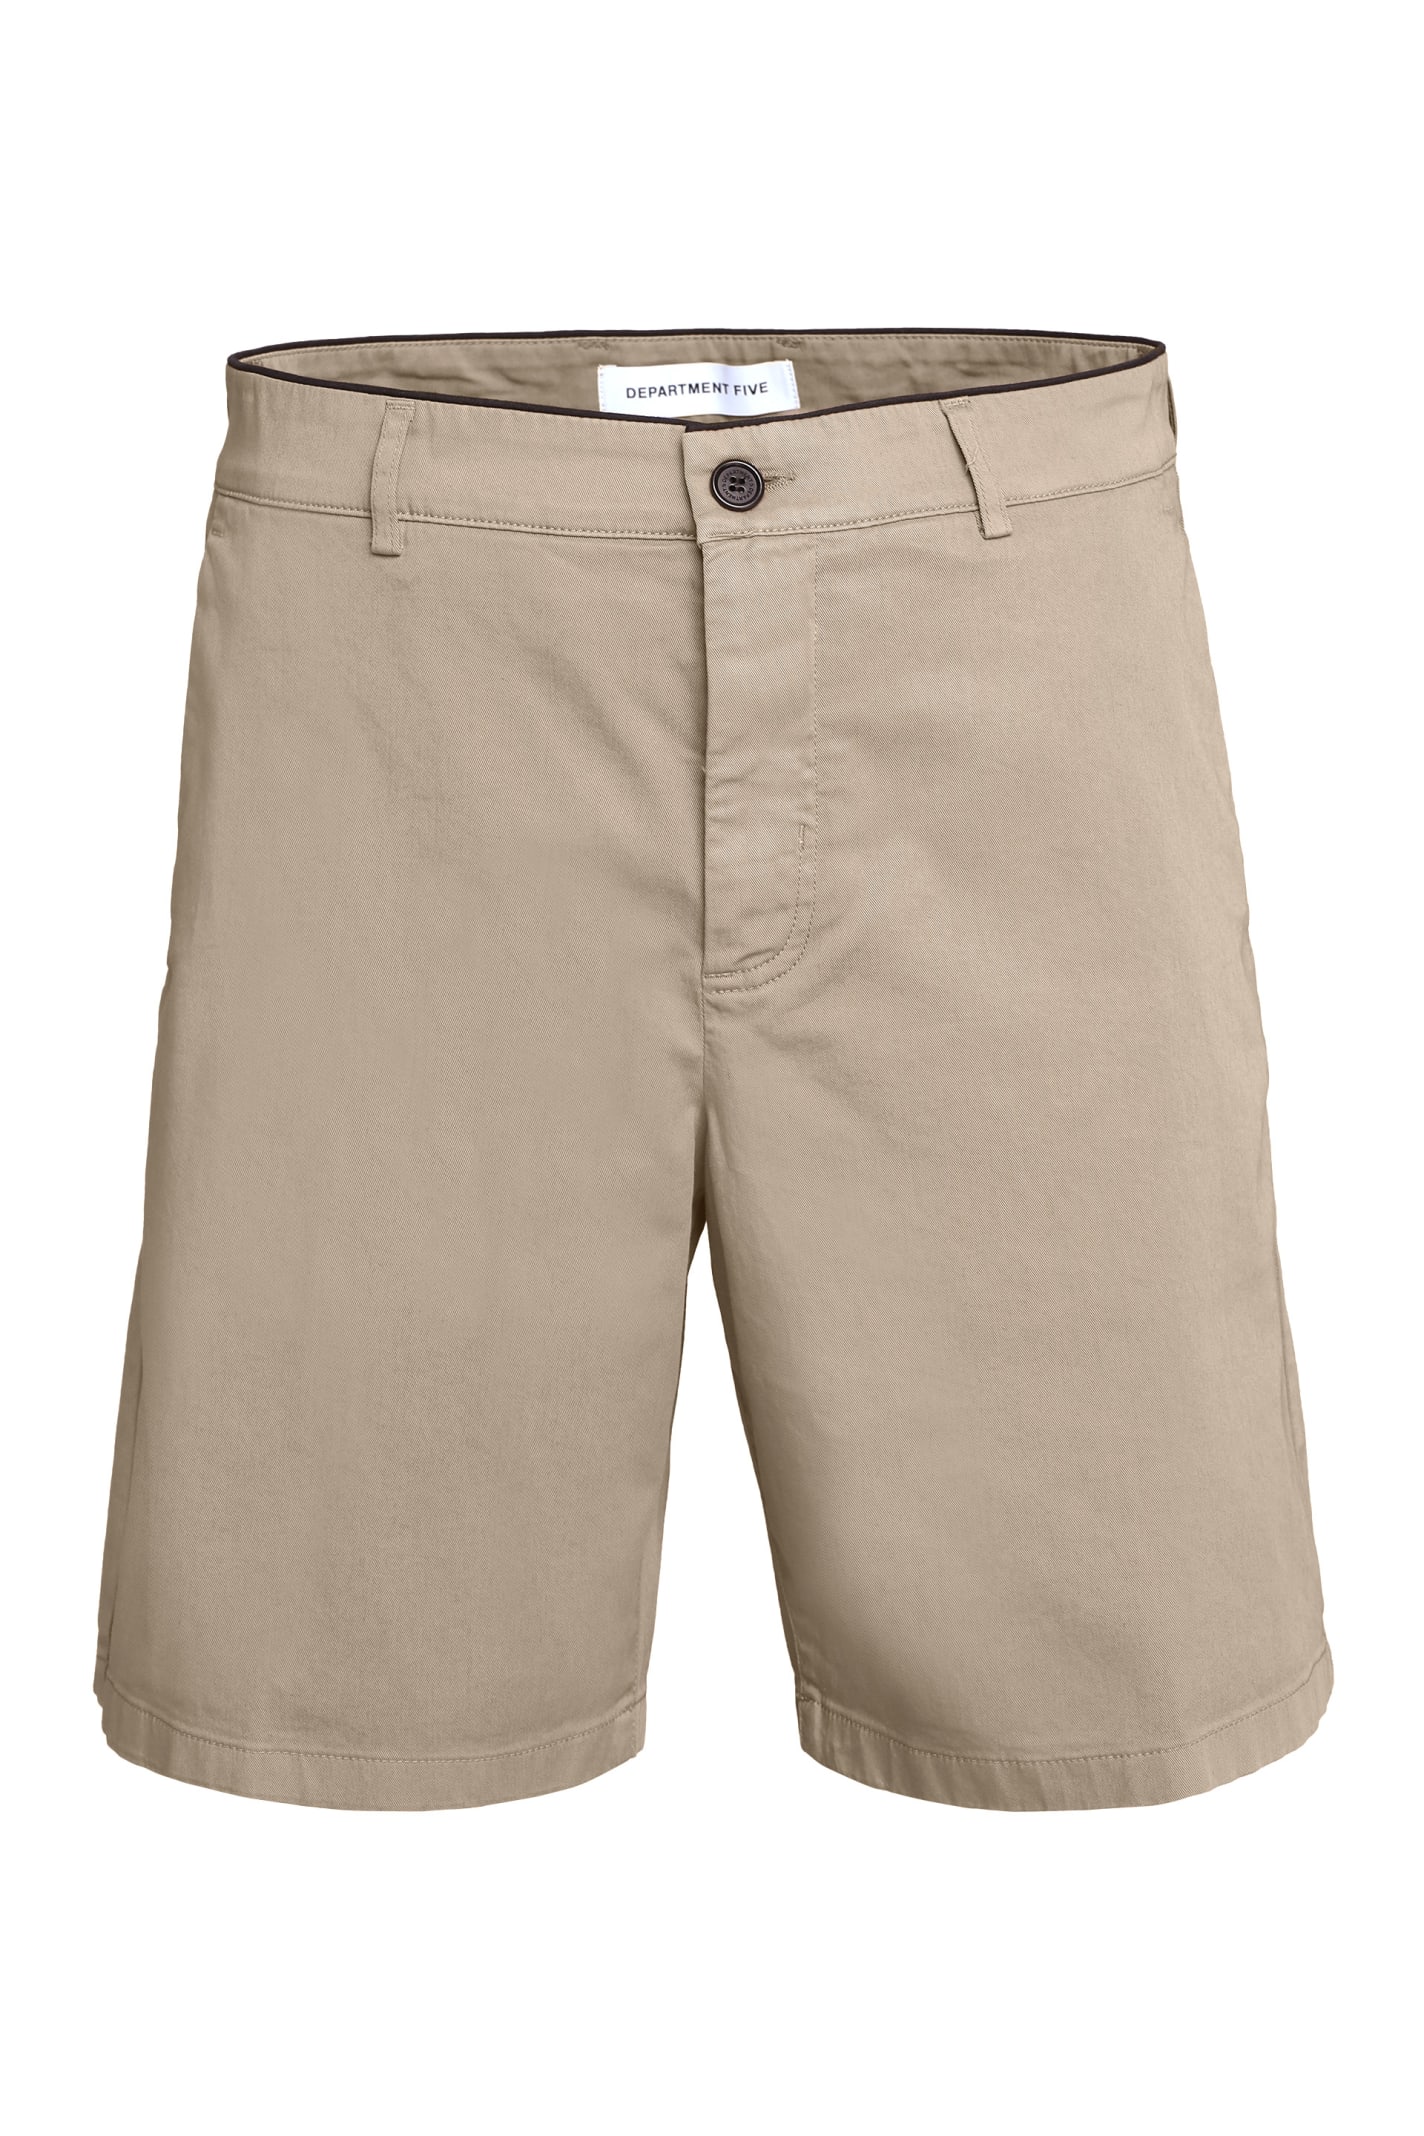 Department Five Tim Short Chino Trousers